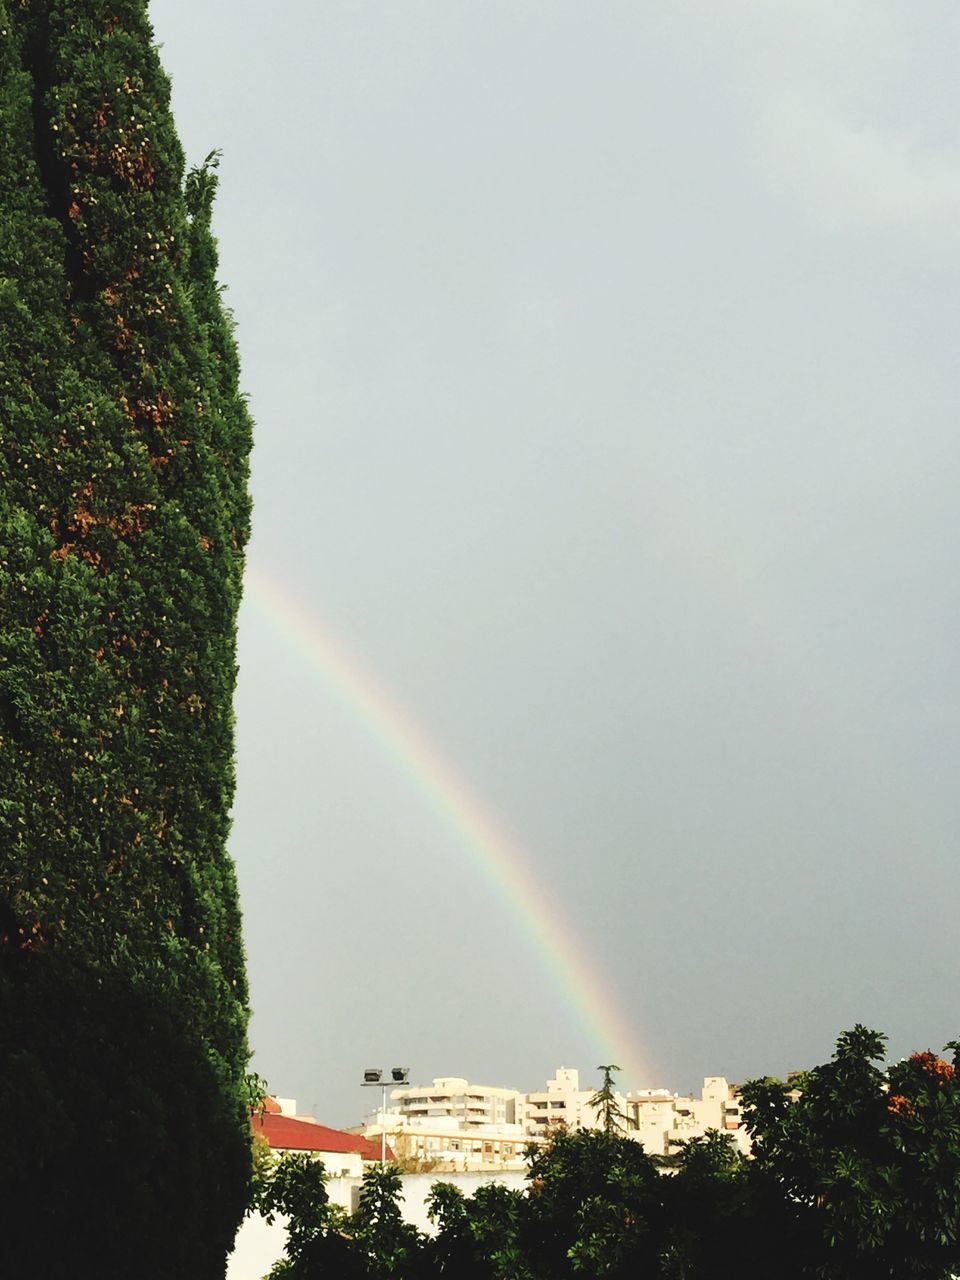 LOW ANGLE VIEW OF RAINBOW OVER TREES AND PLANTS